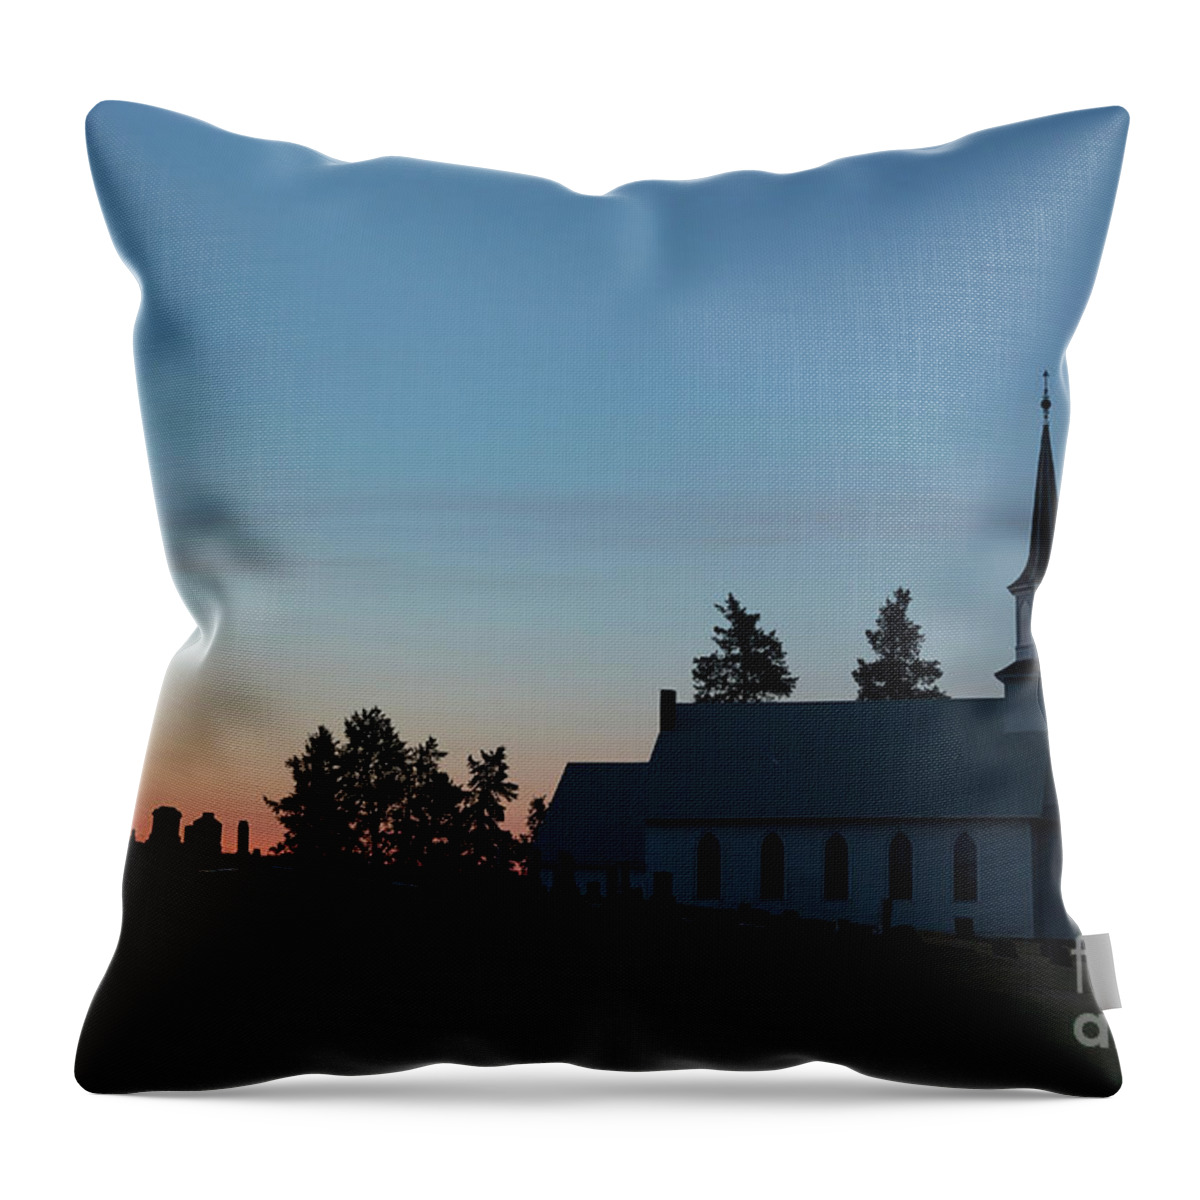 August Throw Pillow featuring the photograph Country Chapel by Idaho Scenic Images Linda Lantzy